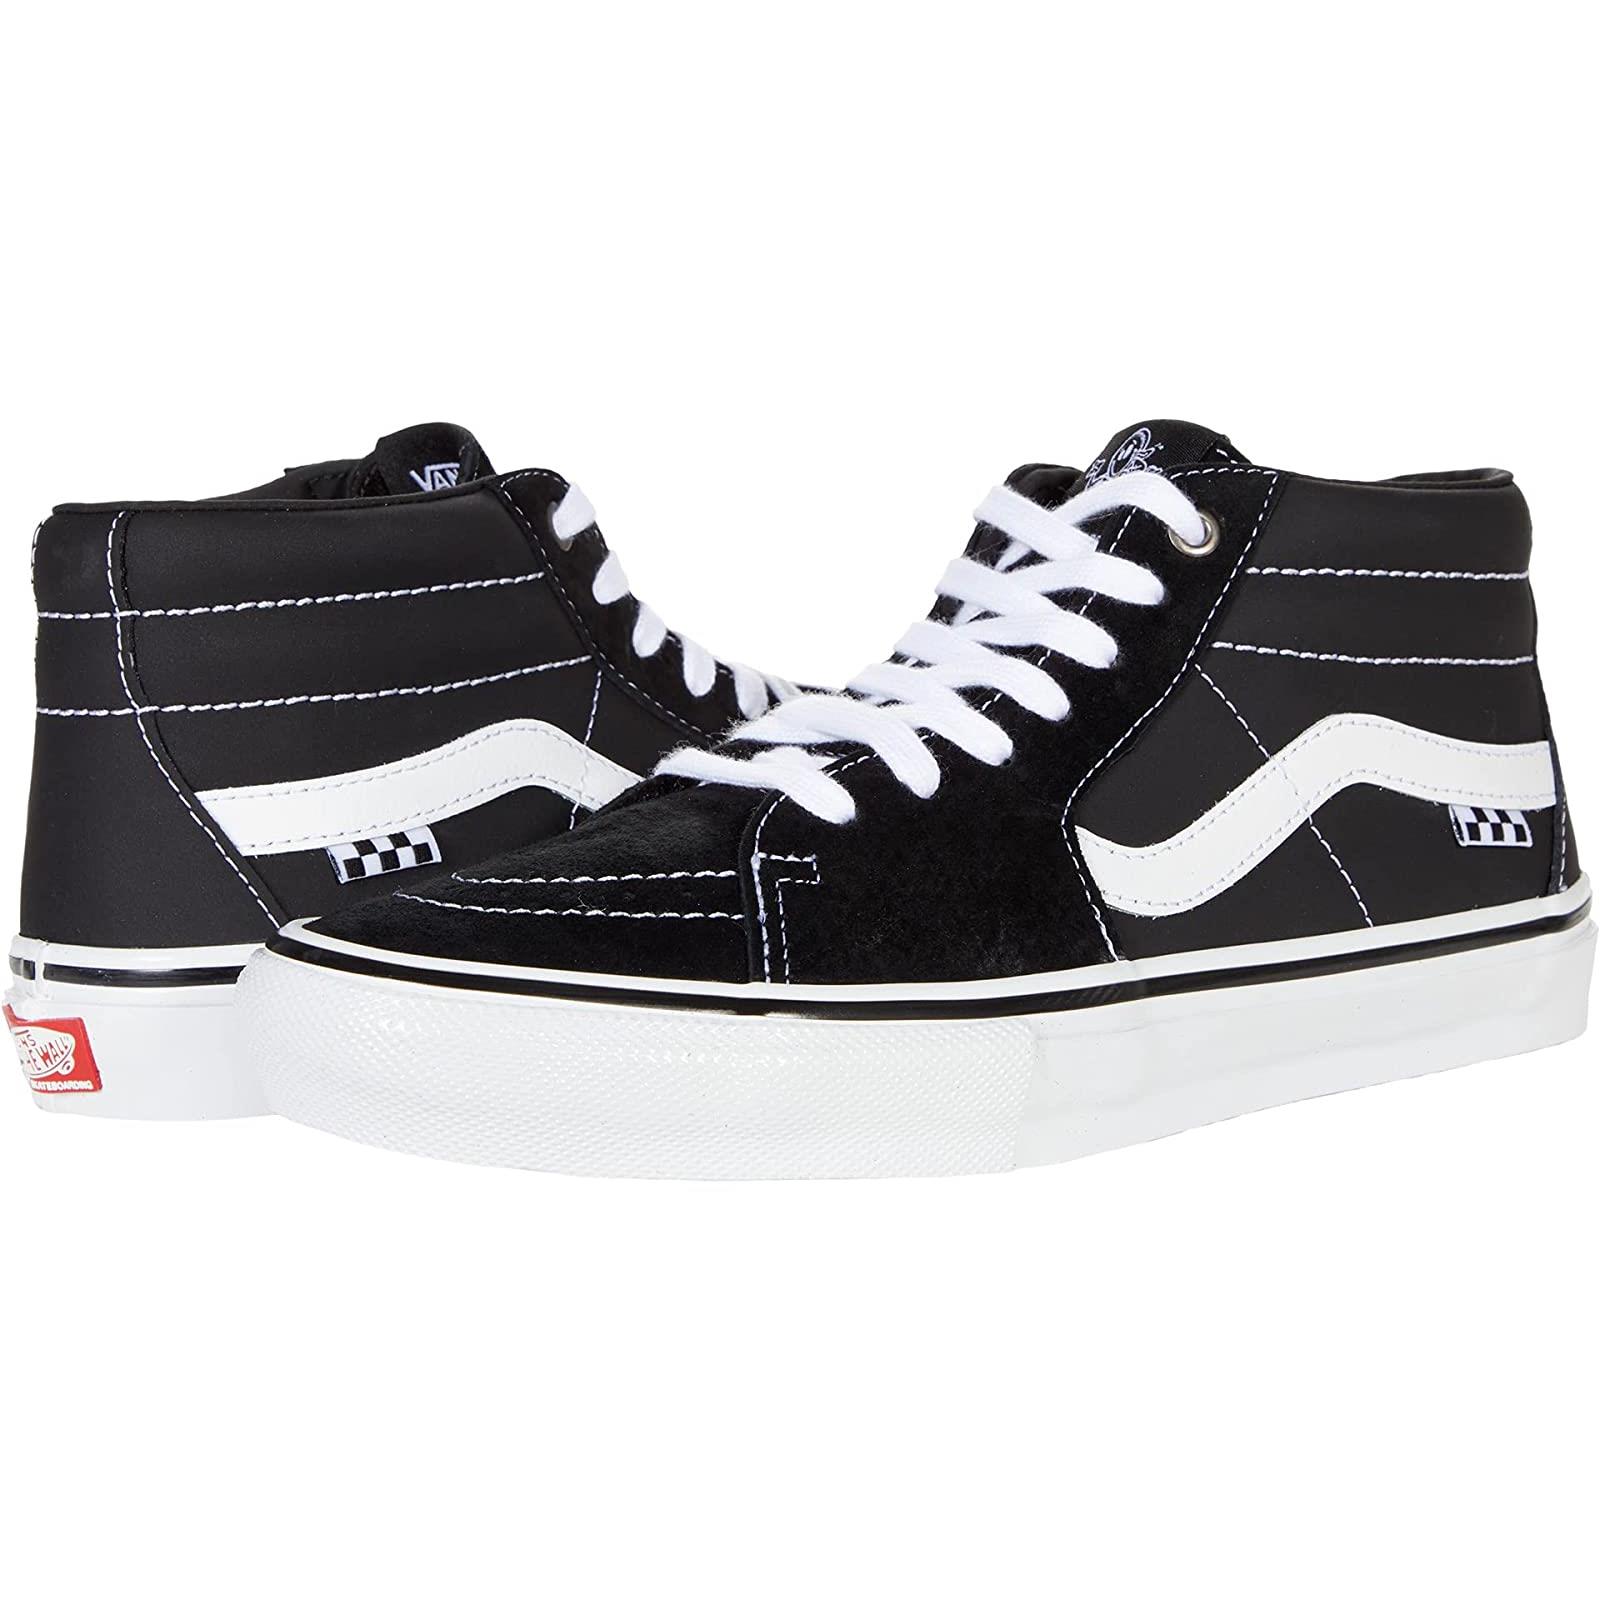 Adult Unisex Sneakers Athletic Shoes Vans Skate Grosso Mid Black/White/Emo Leather